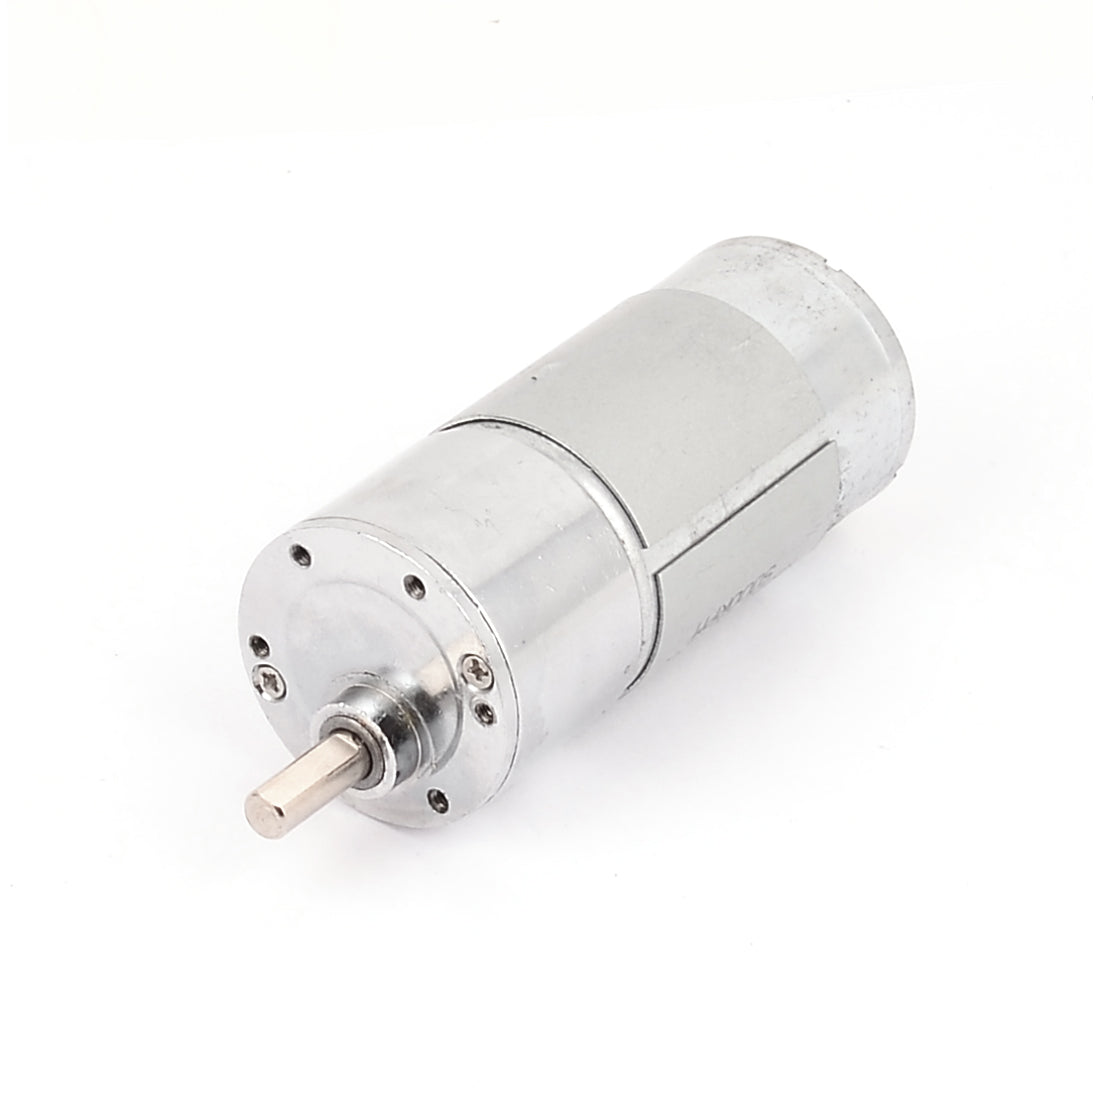 uxcell Uxcell DC 24V 1500RPM High Torque 6mm Shaft Dia Low Speed Solder Cylindrical Gear Box Motor